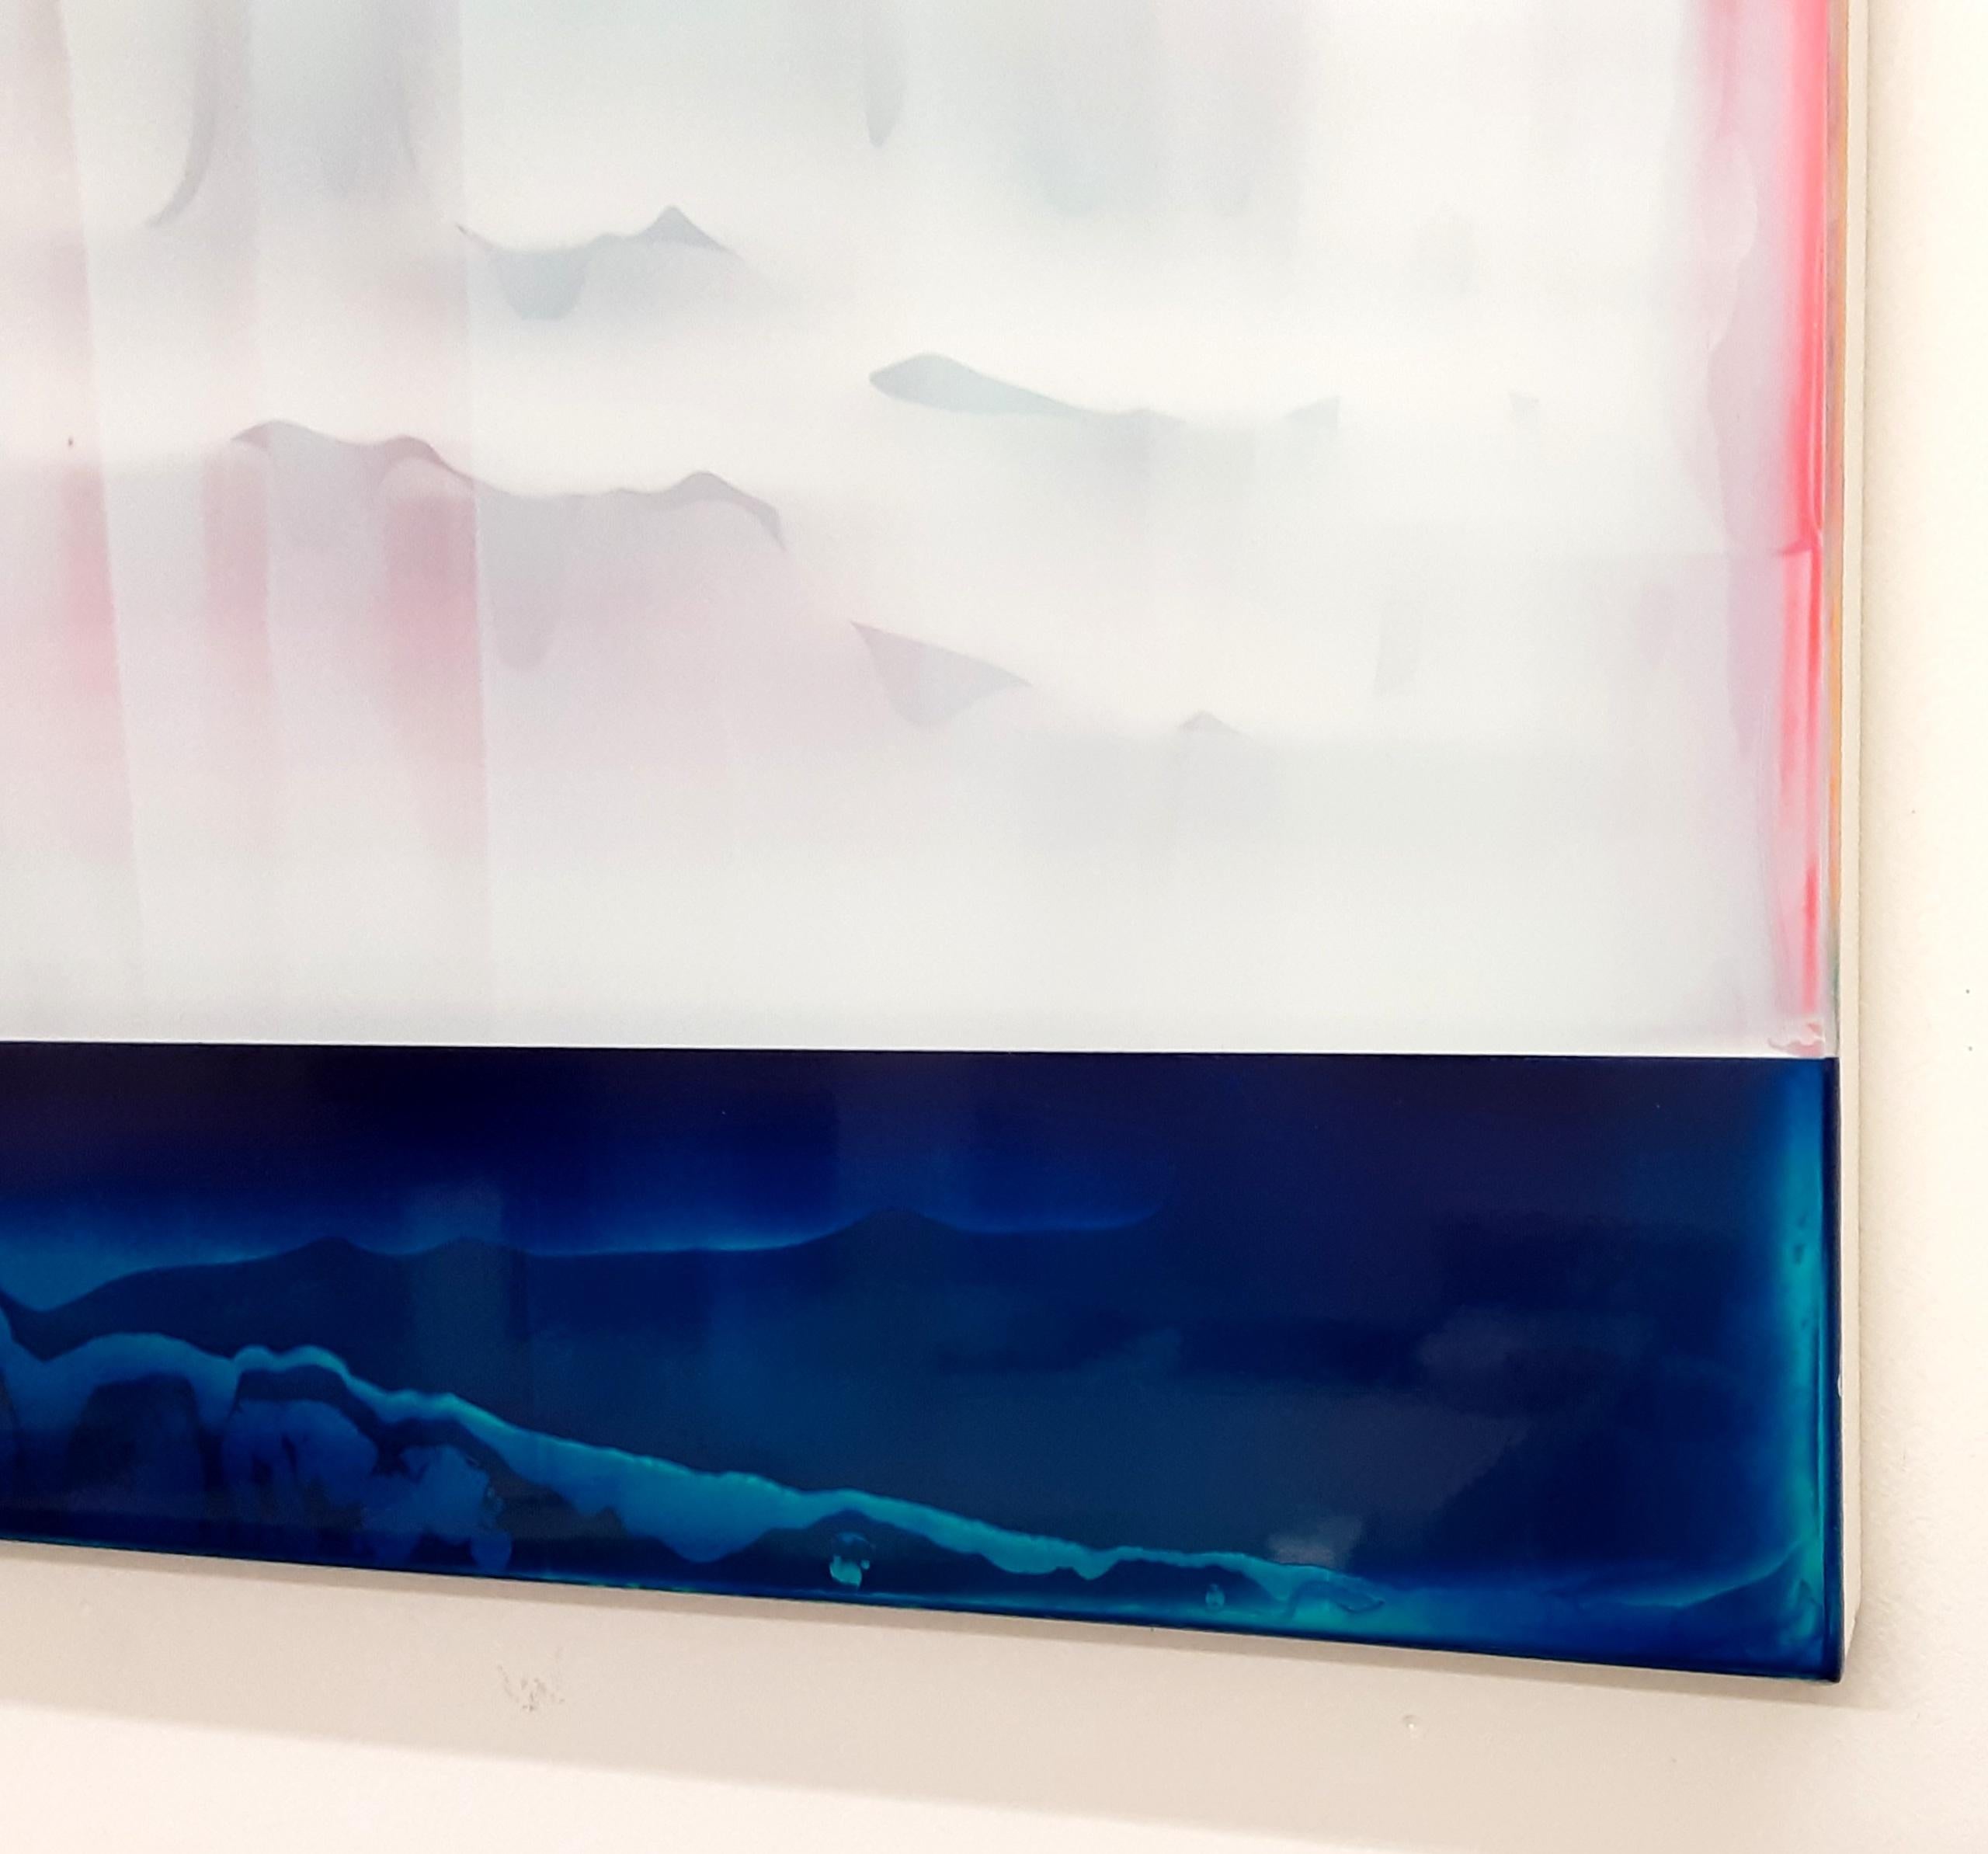 Lucent (4/19) by James Lumsden - Abstract colour painting, pink and light blue For Sale 9